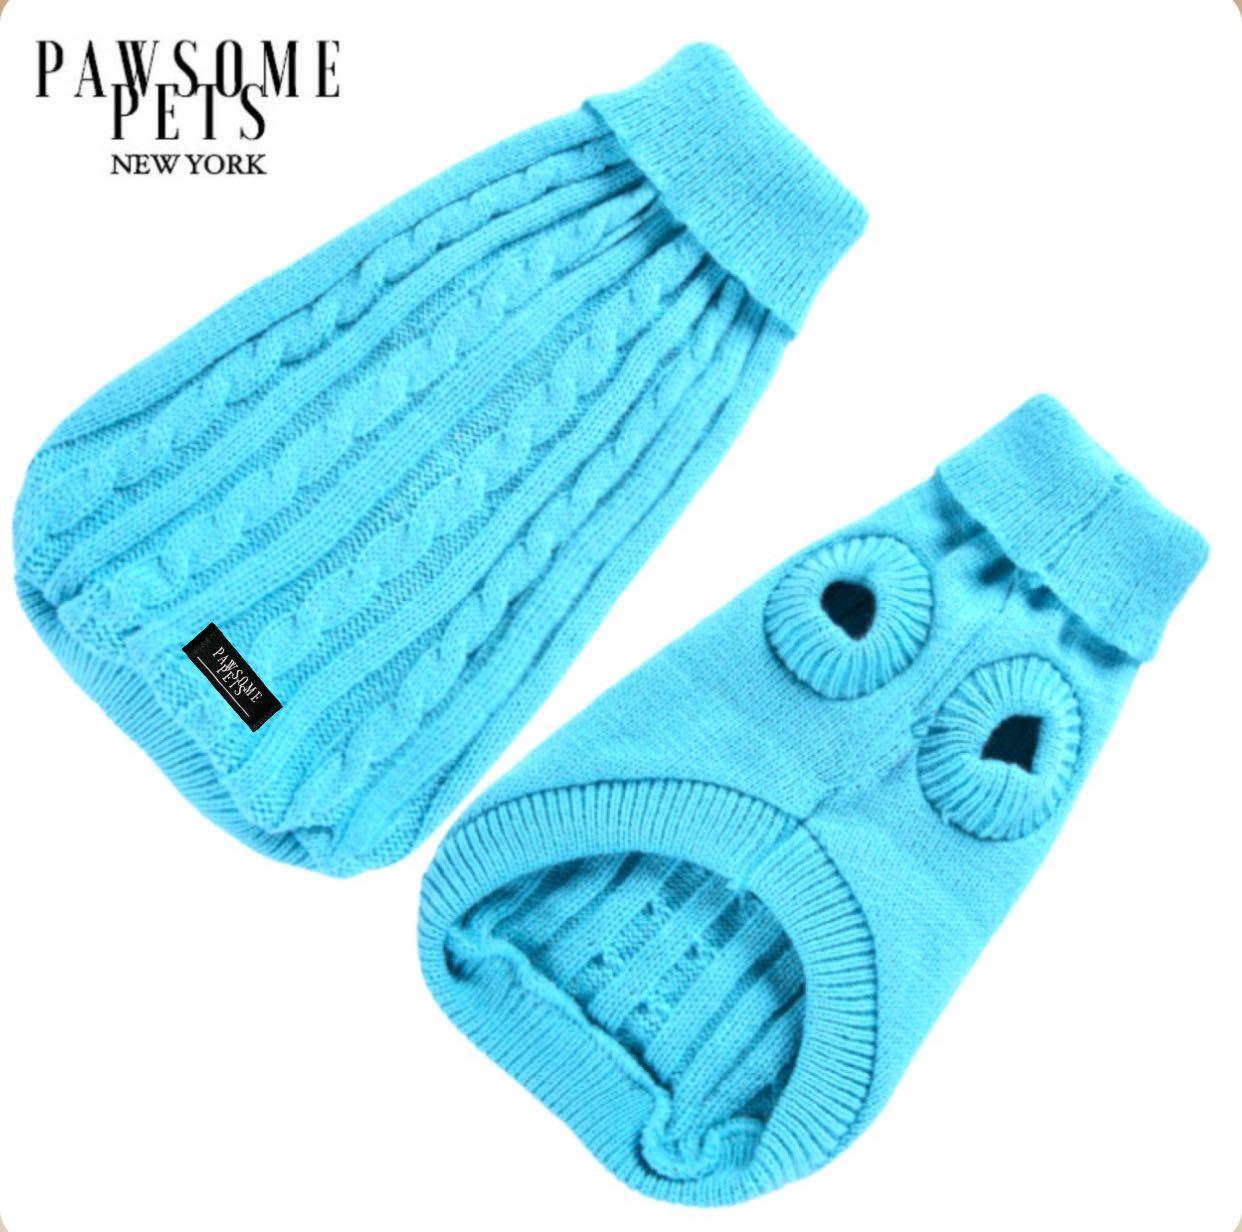 DOG AND CAT CABLE KNIT SWEATER - SKY BLUE - Pawsomepetsnewyork